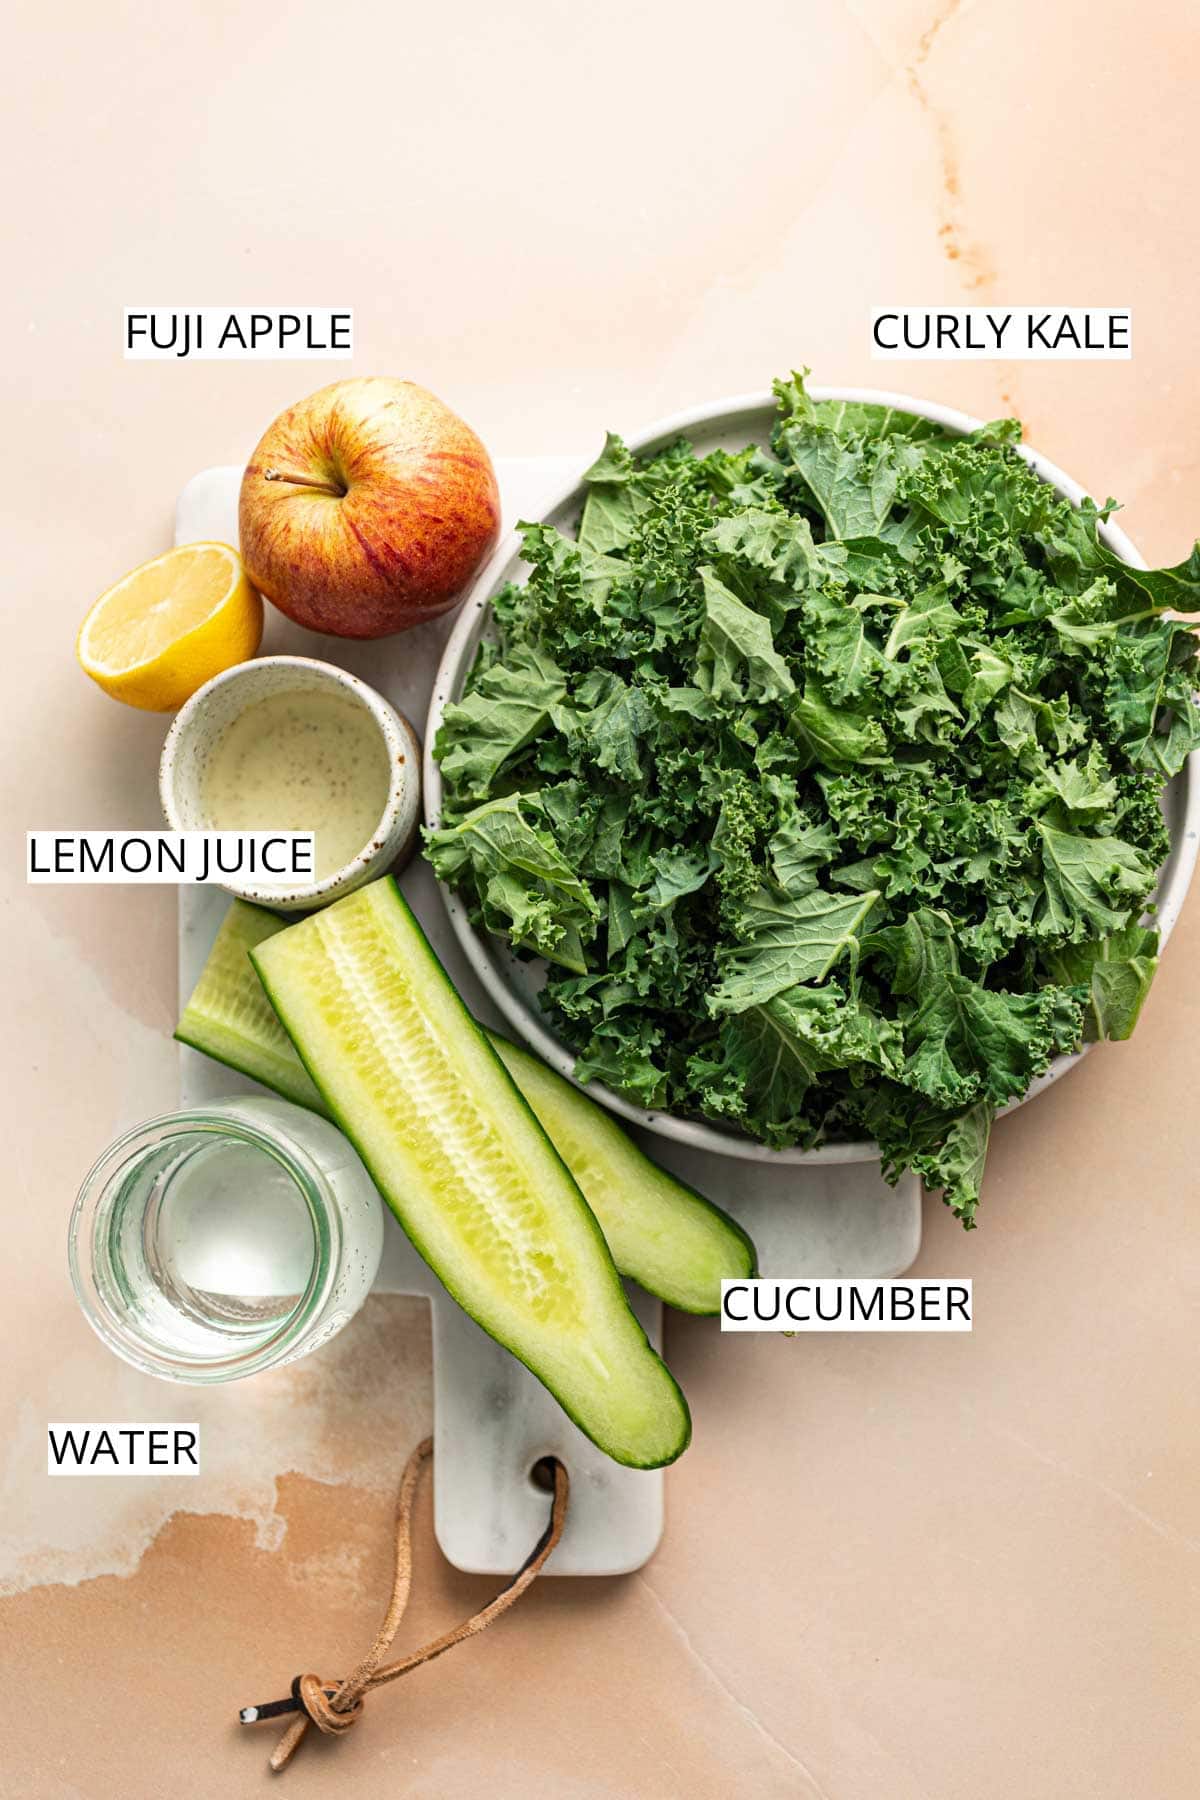 Kale, cucumber, lemon juice, water and apple on a marble cutting board.